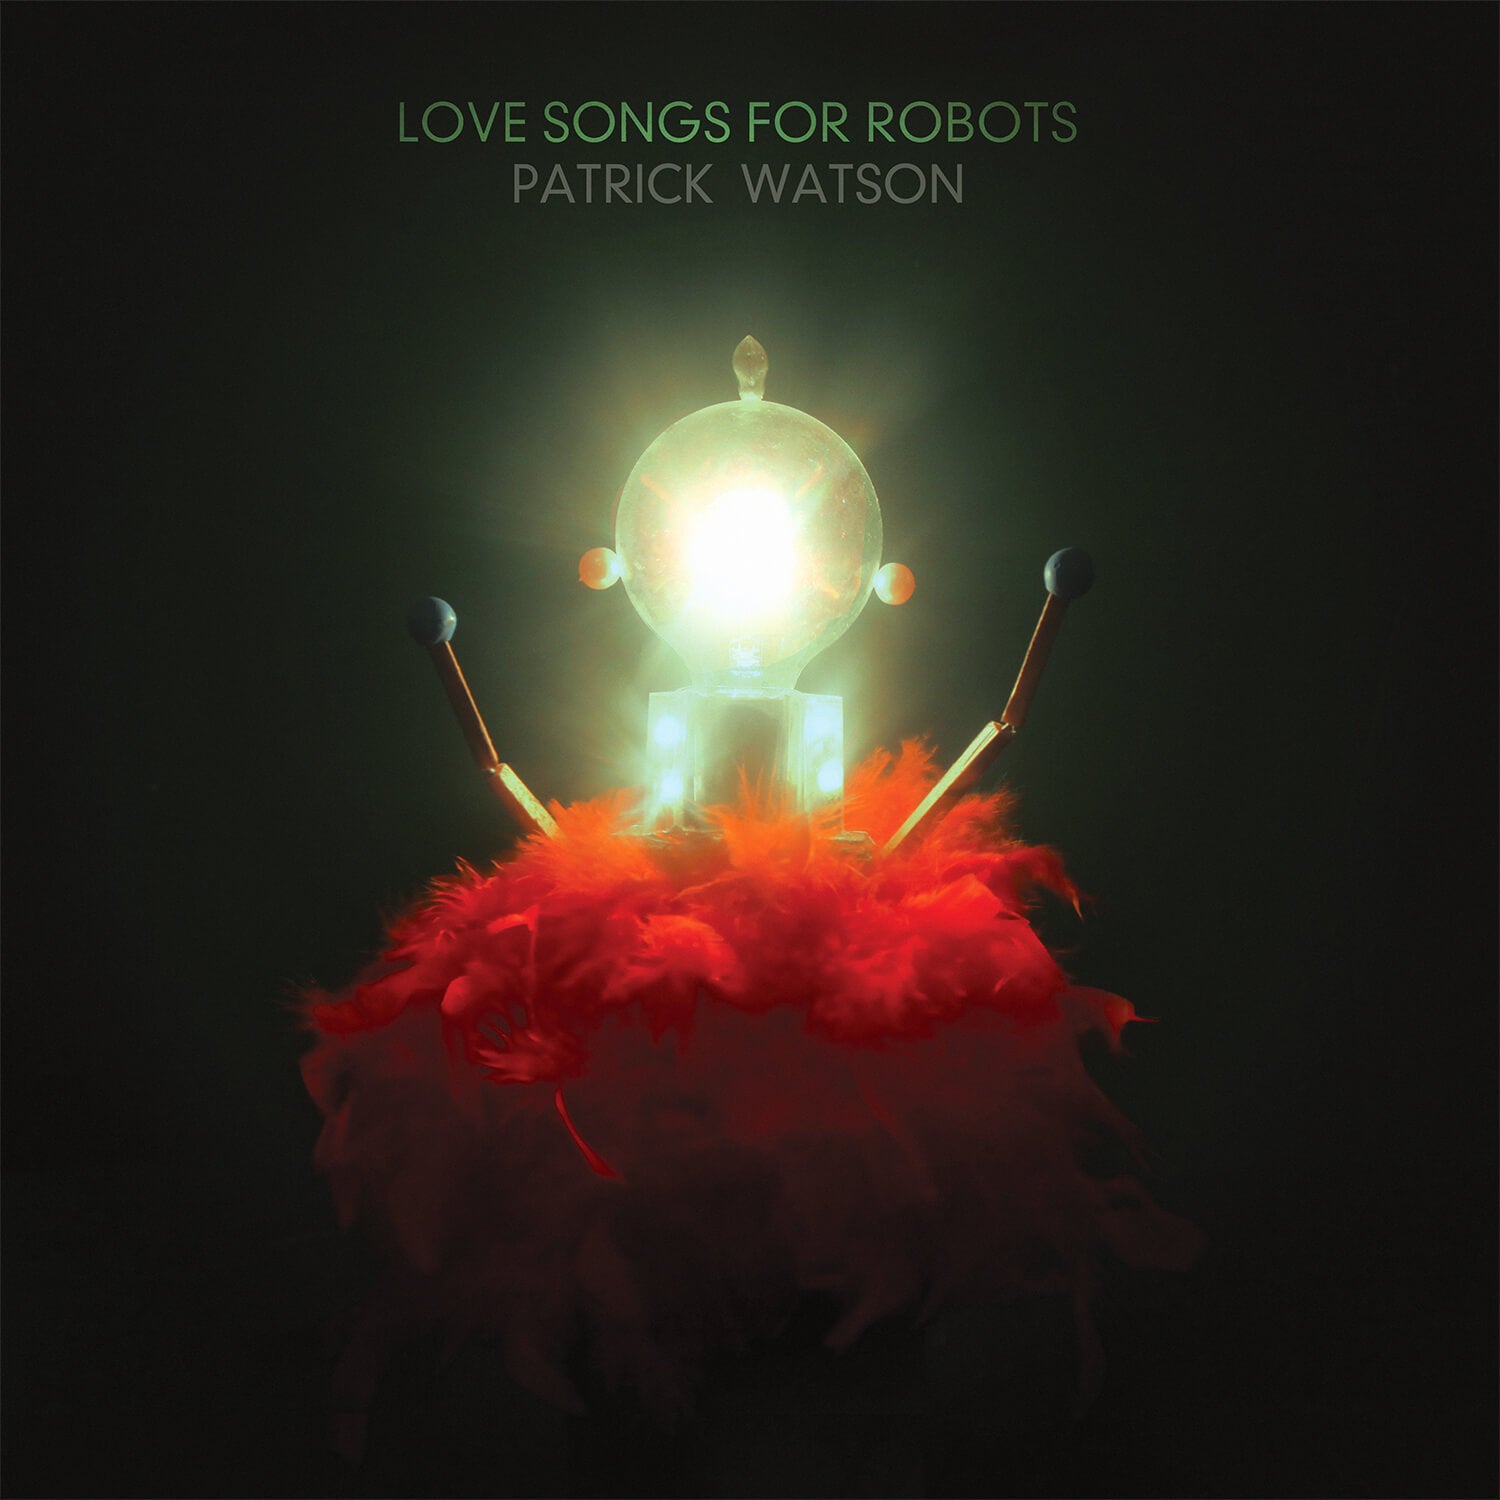 Download - Love Songs for Robots